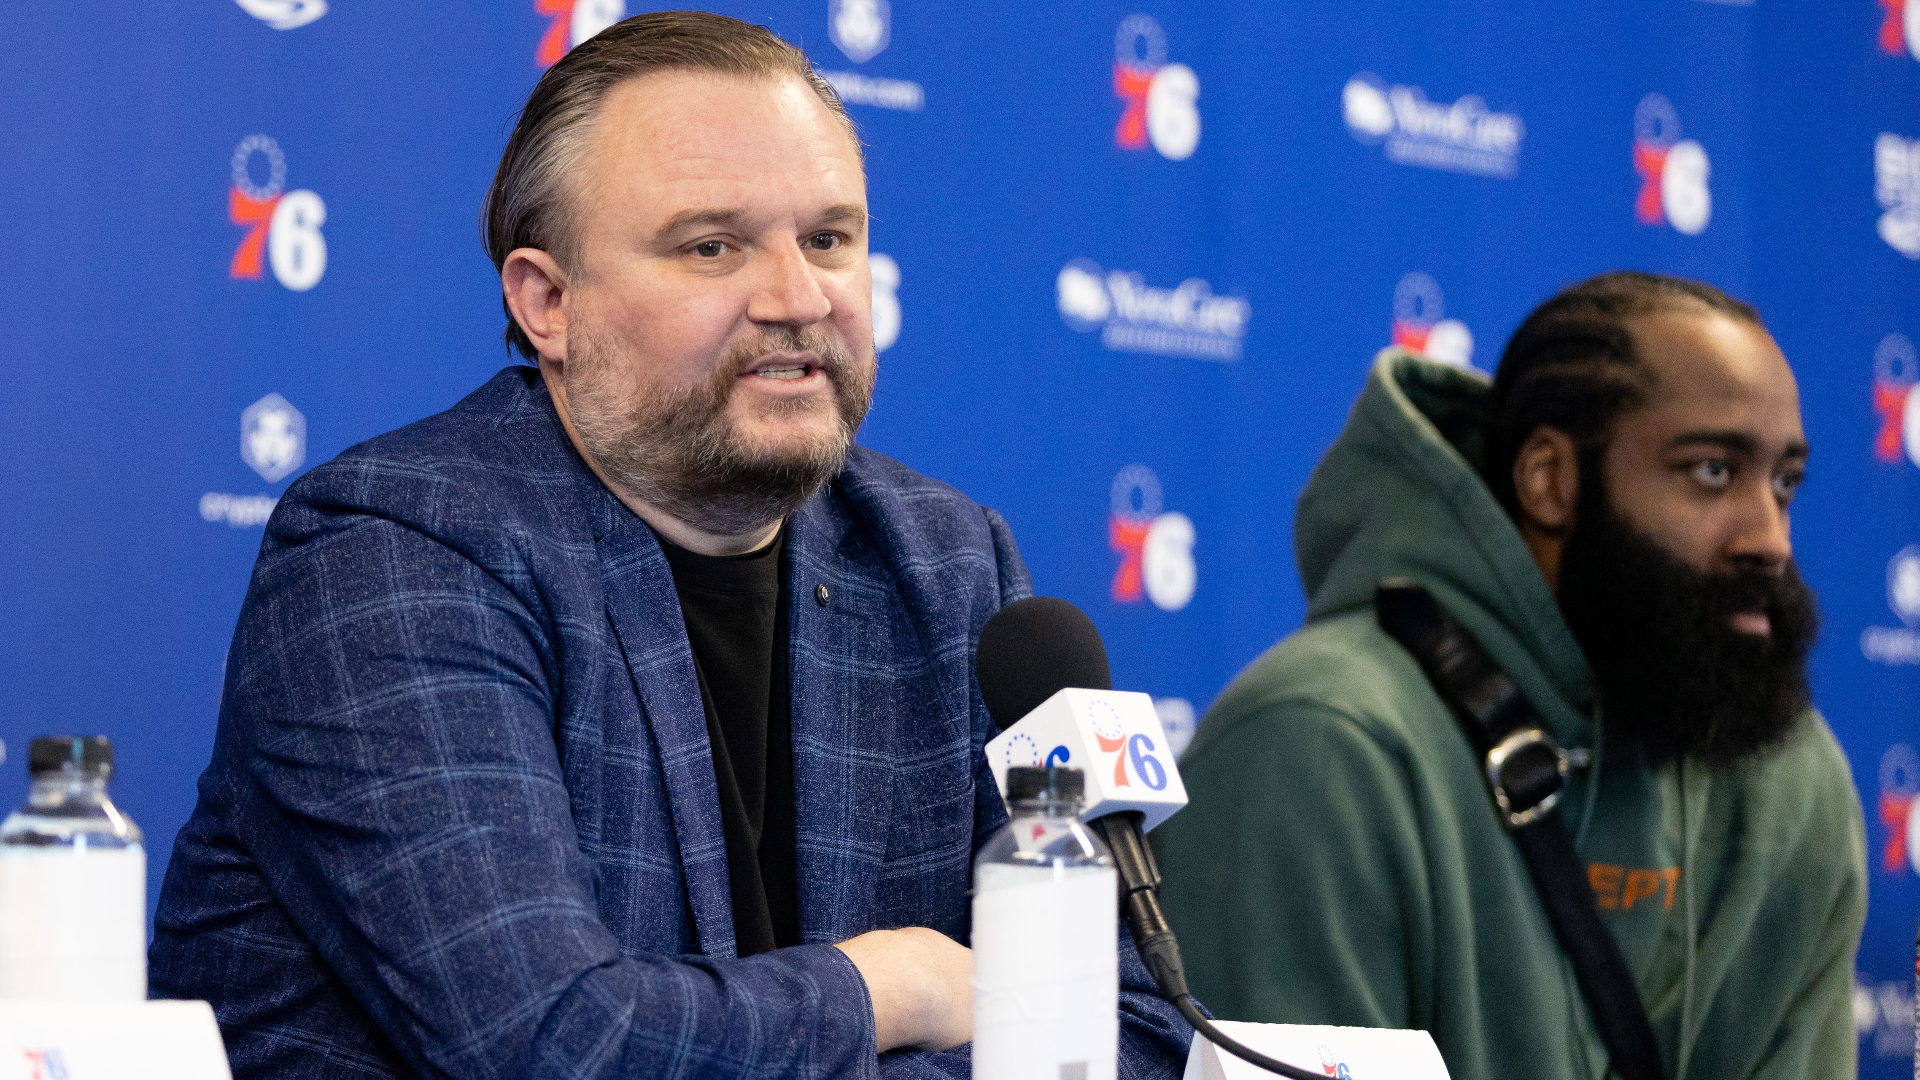 NBA Rumors: How Daryl Morey Reacted To James Harden’s ‘Liar’ Remark